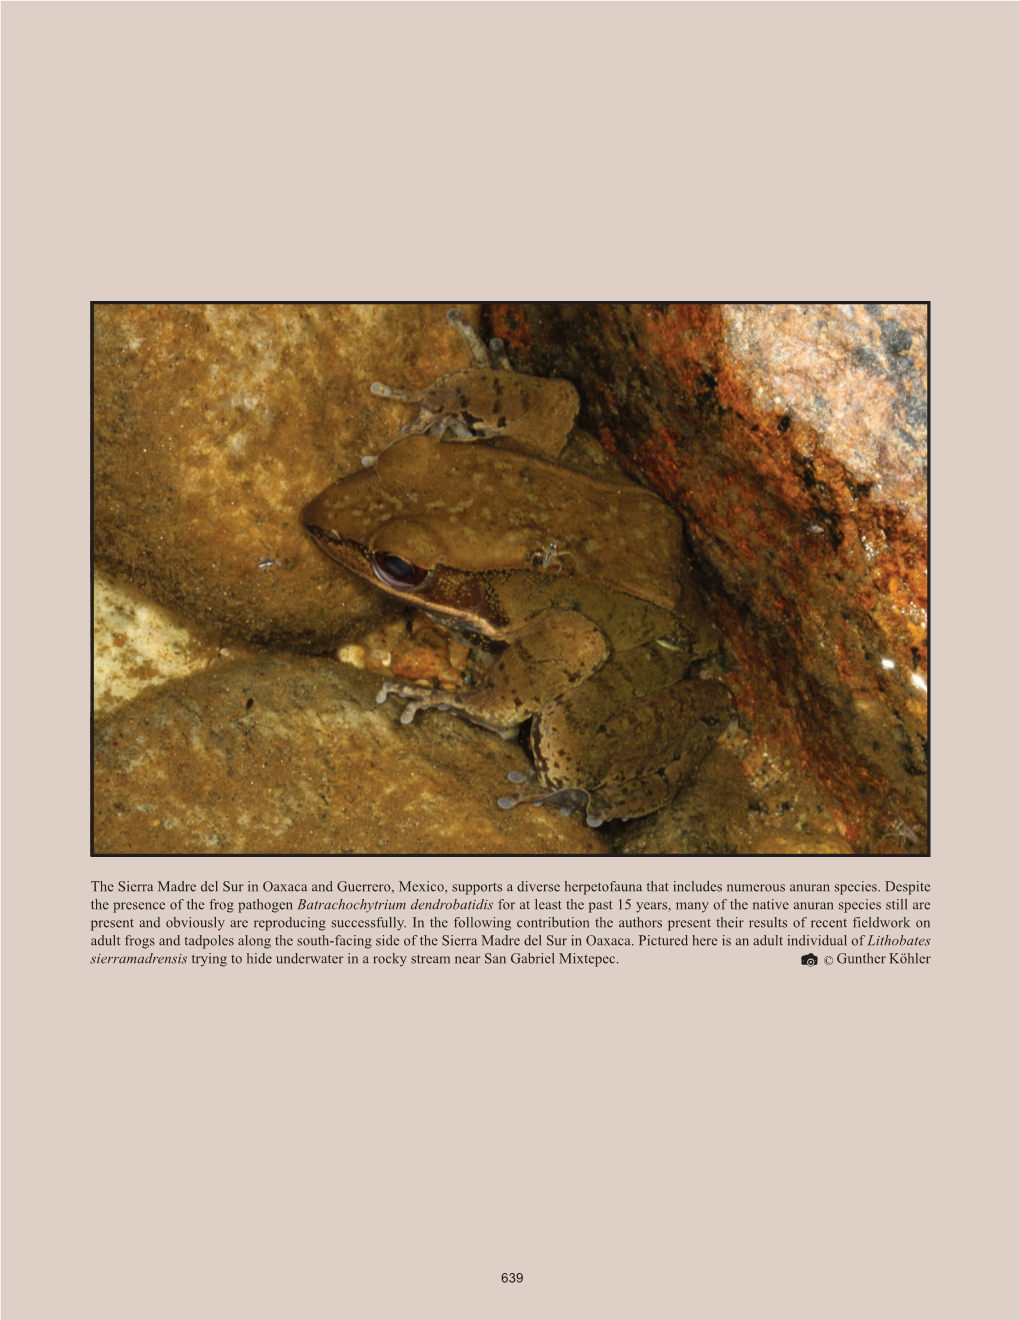 A Survey of Tadpoles and Adult Anurans in the Sierra Madre Del Sur of Oaxaca, Mexico (Amphibia: Anura)